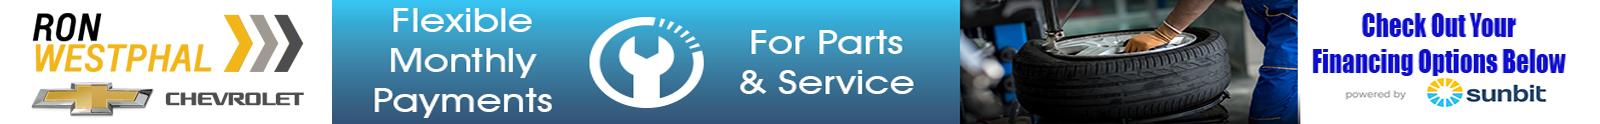 Ron Westphal Financing Options For Service & Parts 